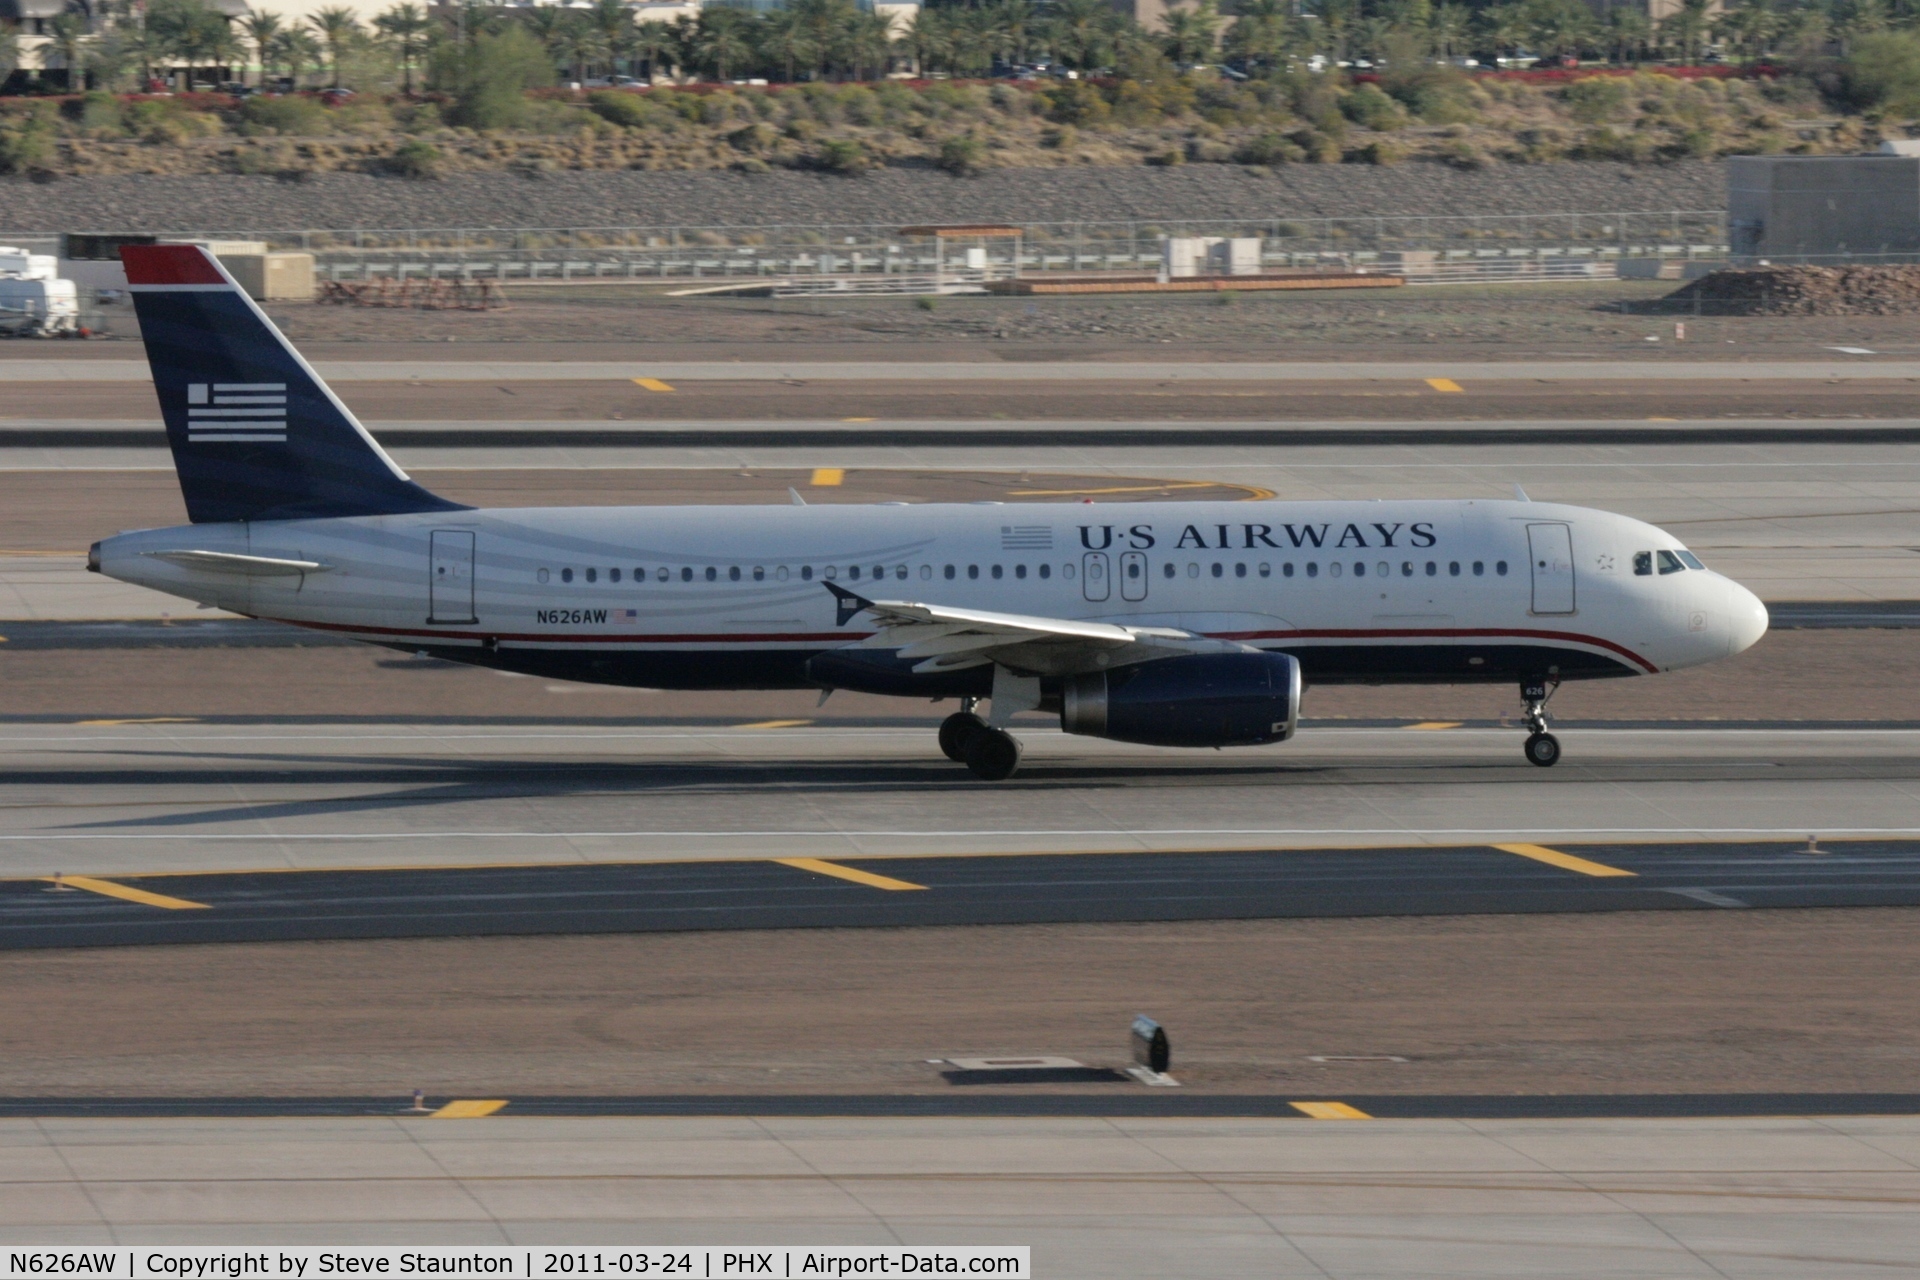 N626AW, 1989 Airbus A320-231 C/N 65, Taken at Phoenix Sky Harbor Airport, in March 2011 whilst on an Aeroprint Aviation tour